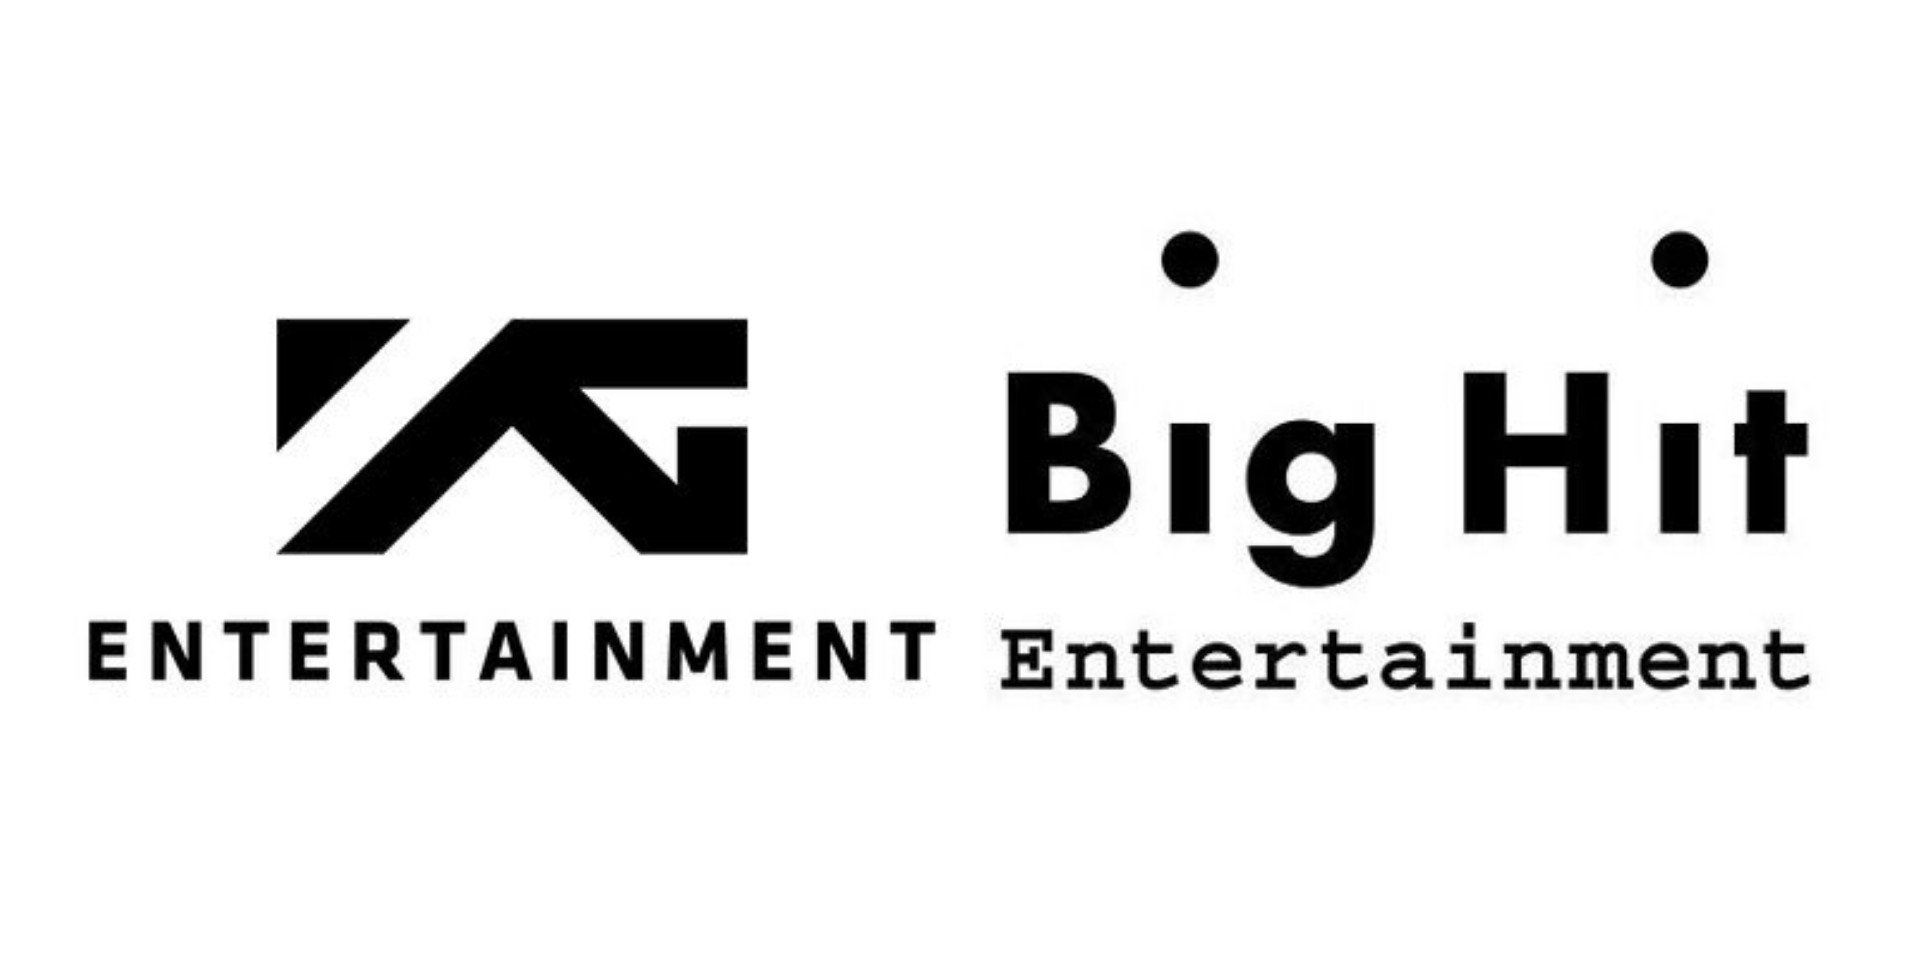 YG Entertainment joins forces with Big Hit Entertainment to "further expand global reach"